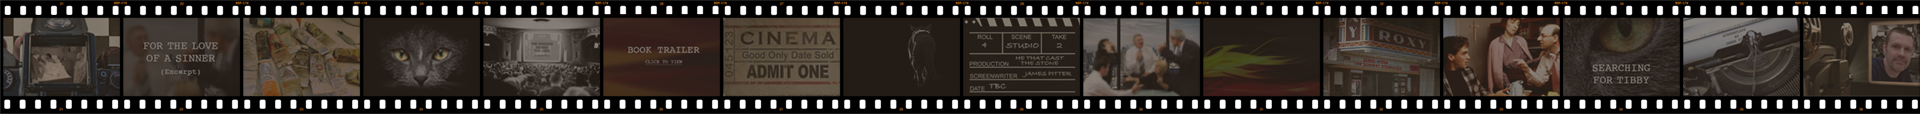 Film strip showing pictures used on website